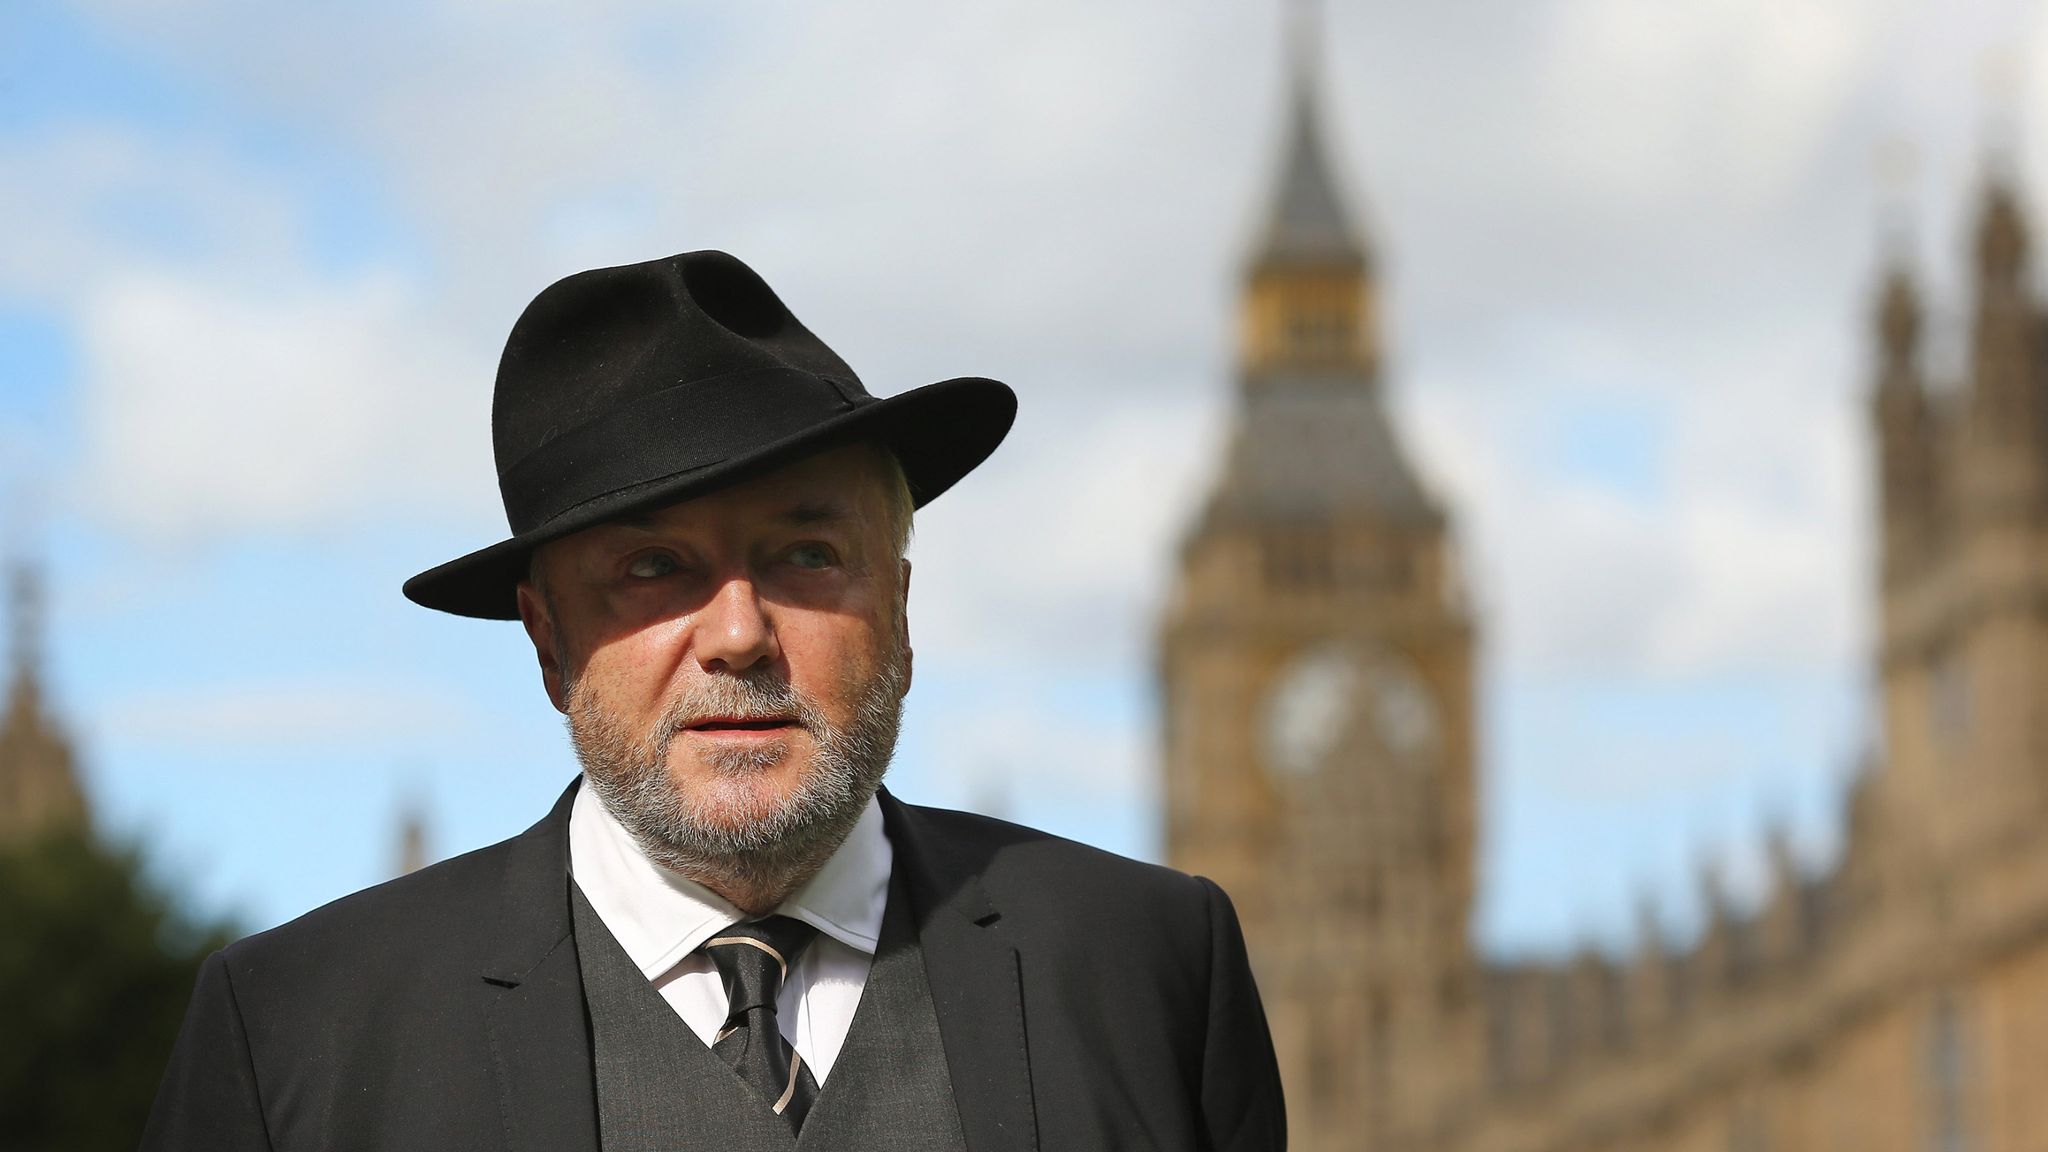 George Galloway: 700 Corpses with their Hands Tied Behind their Backs, Many gutted with Organs stolen